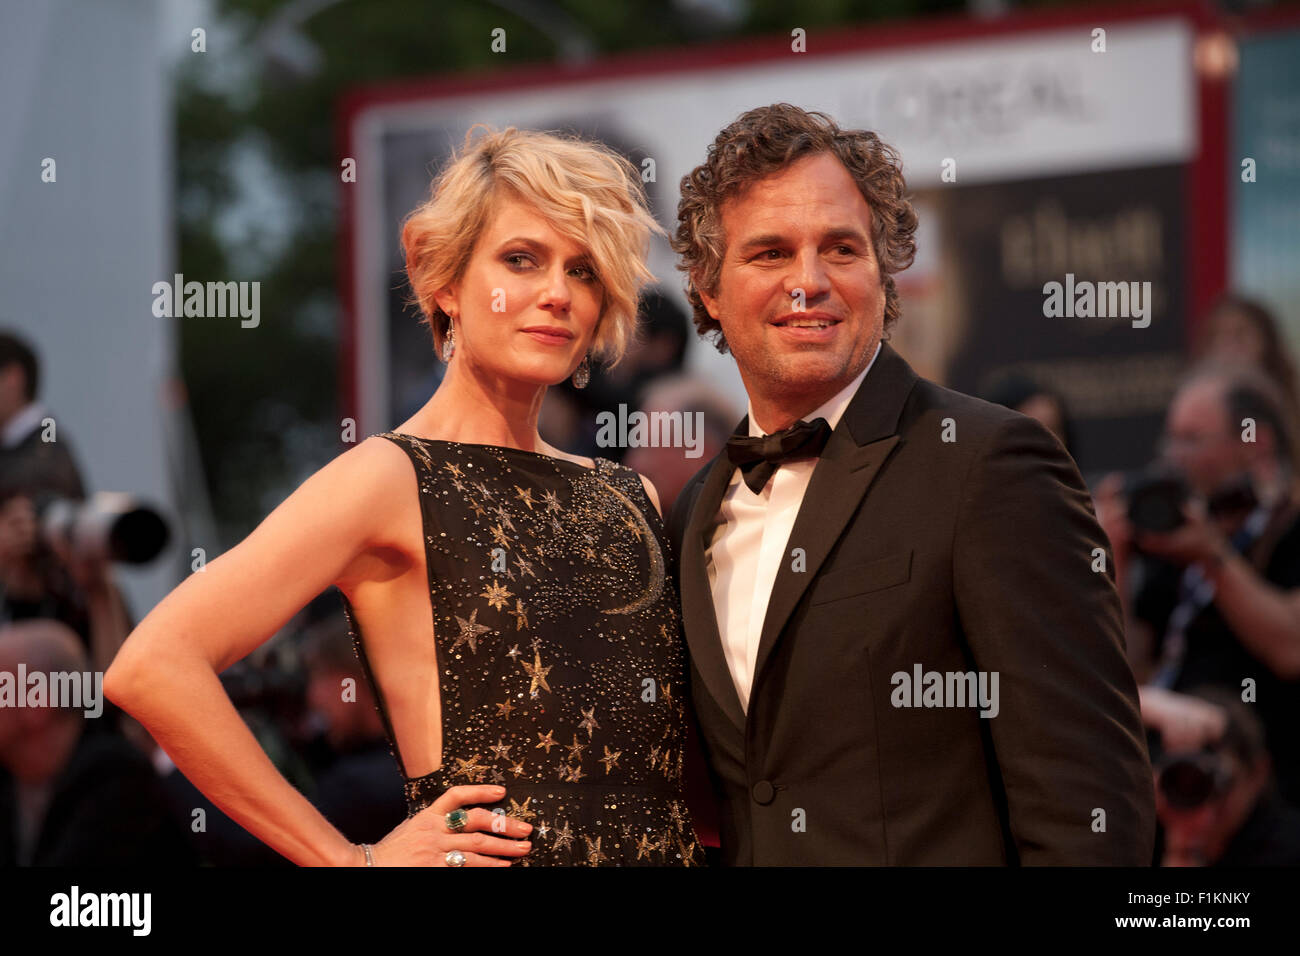 Venice Lido, Italy. 3rd September, 2015. Actor Mark Ruffalo and Sunrise Coigney at the gala screening for the film Spotlight at the 72nd Venice Film Festival, Thursday September 3rd 2015, Venice Lido, Italy. Credit:  Doreen Kennedy/Alamy Live News Stock Photo